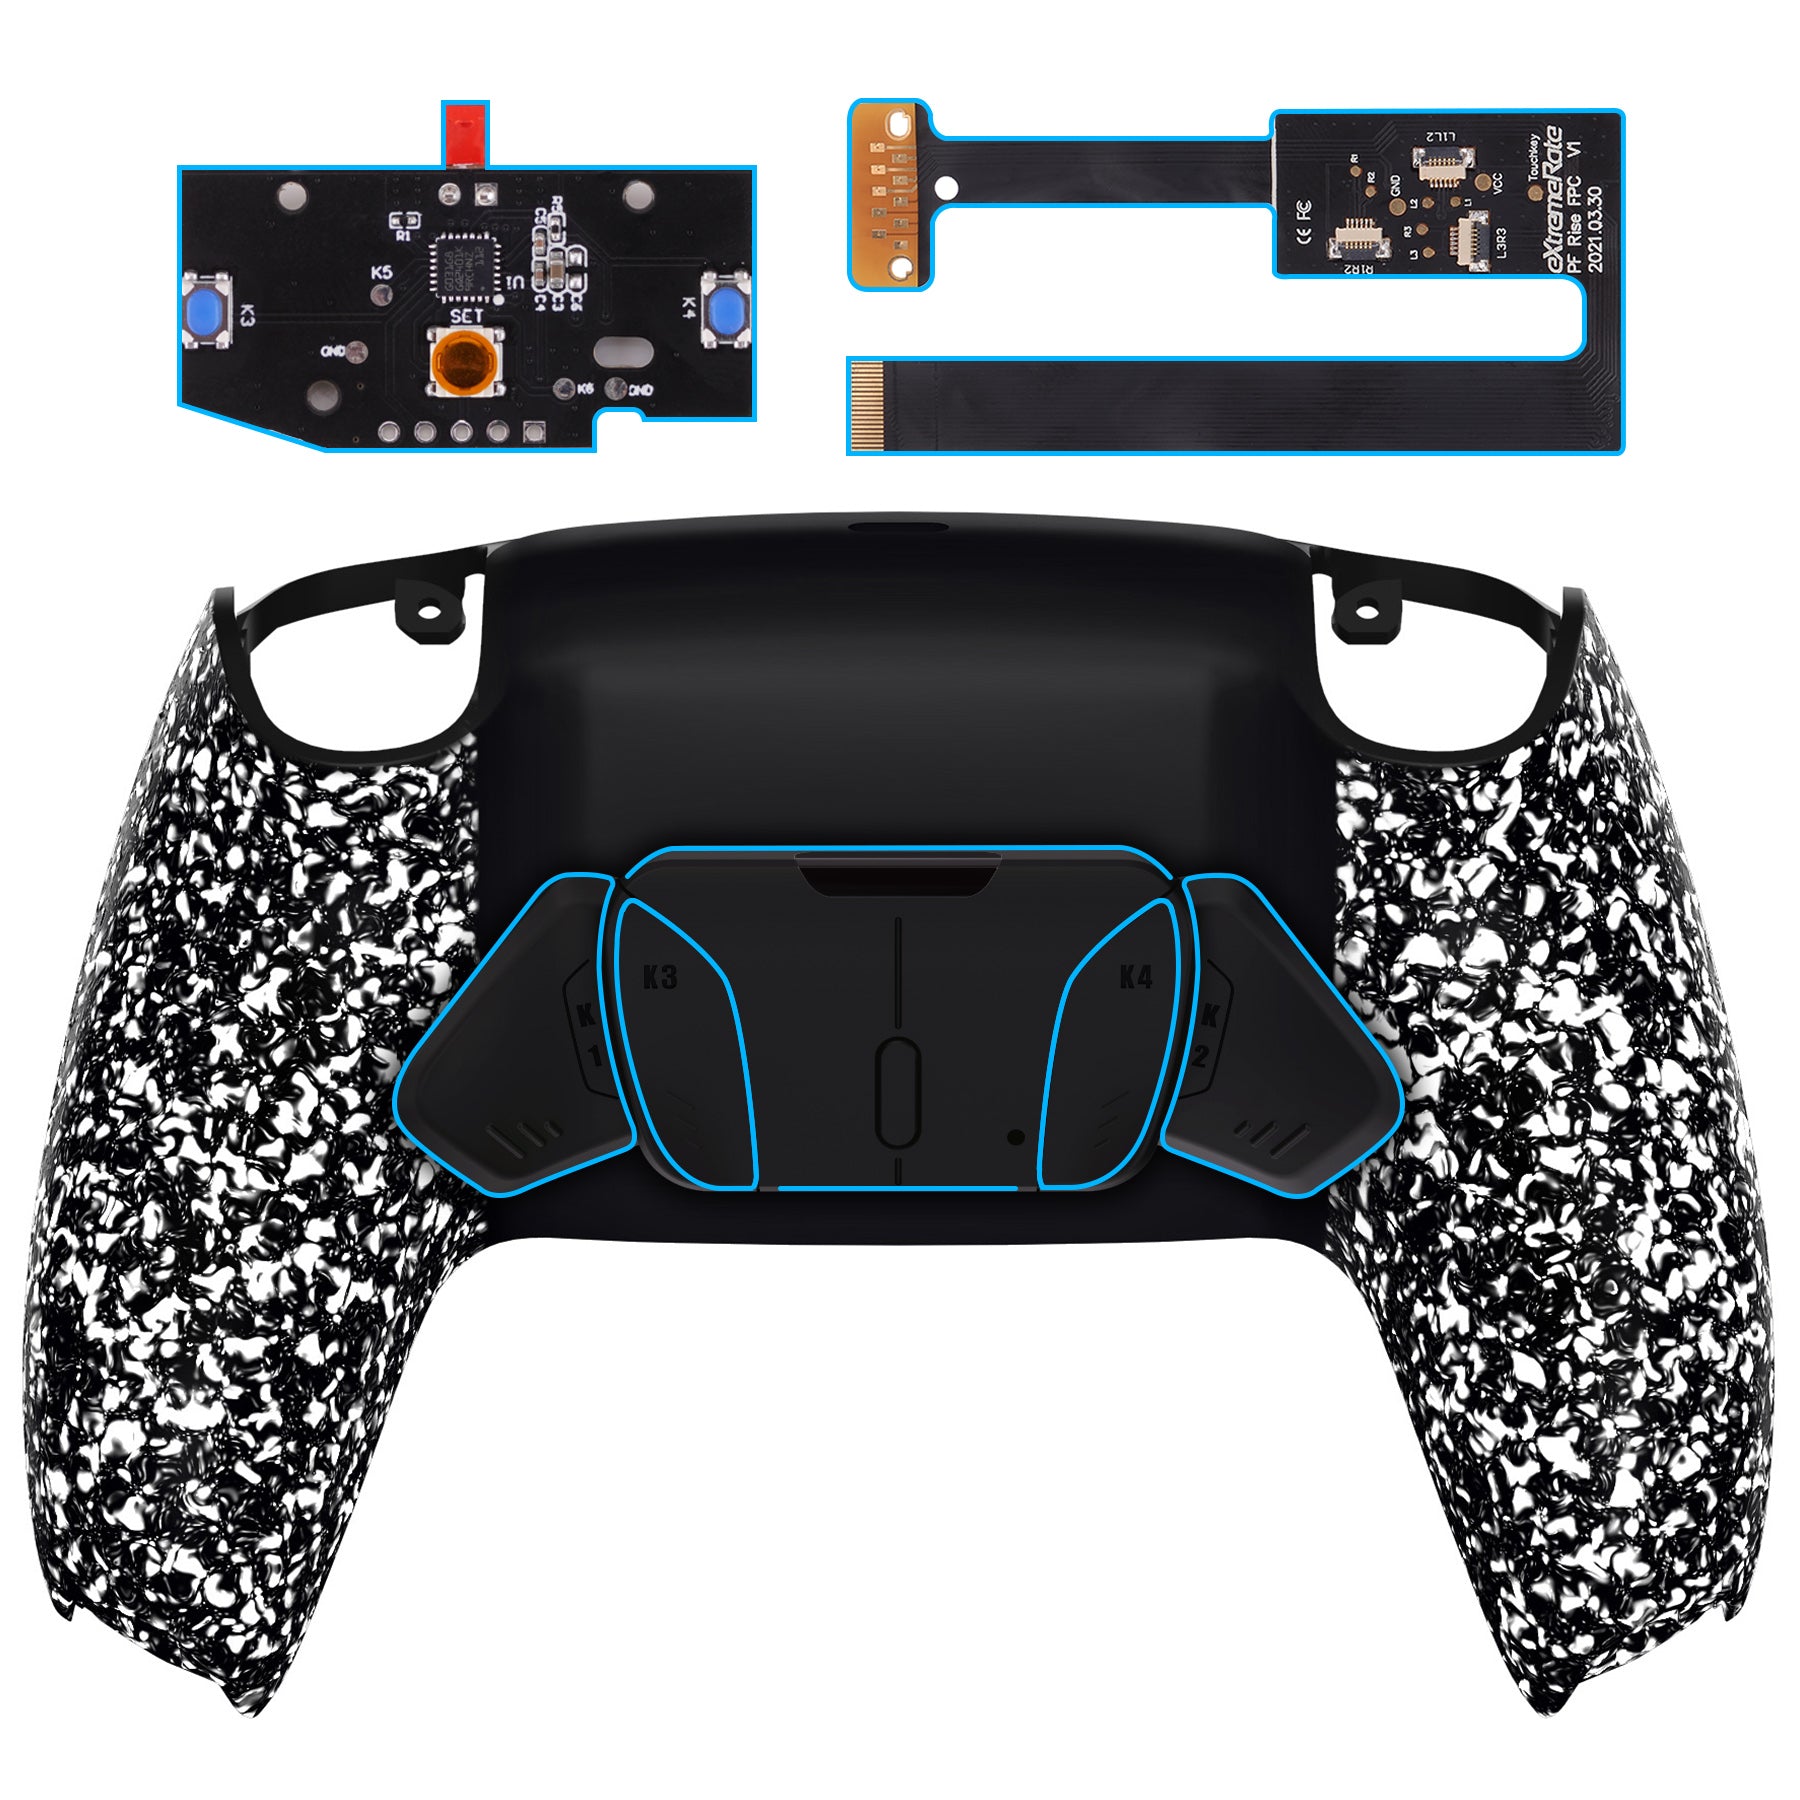 eXtremeRate Retail Textured White Remappable RISE 4.0 Remap Kit for ps5 Controller BDM 010 & BDM 020, Upgrade Board & Redesigned Back Shell & 4 Back Buttons for ps5 Controller - Controller NOT Included - YPFP3003